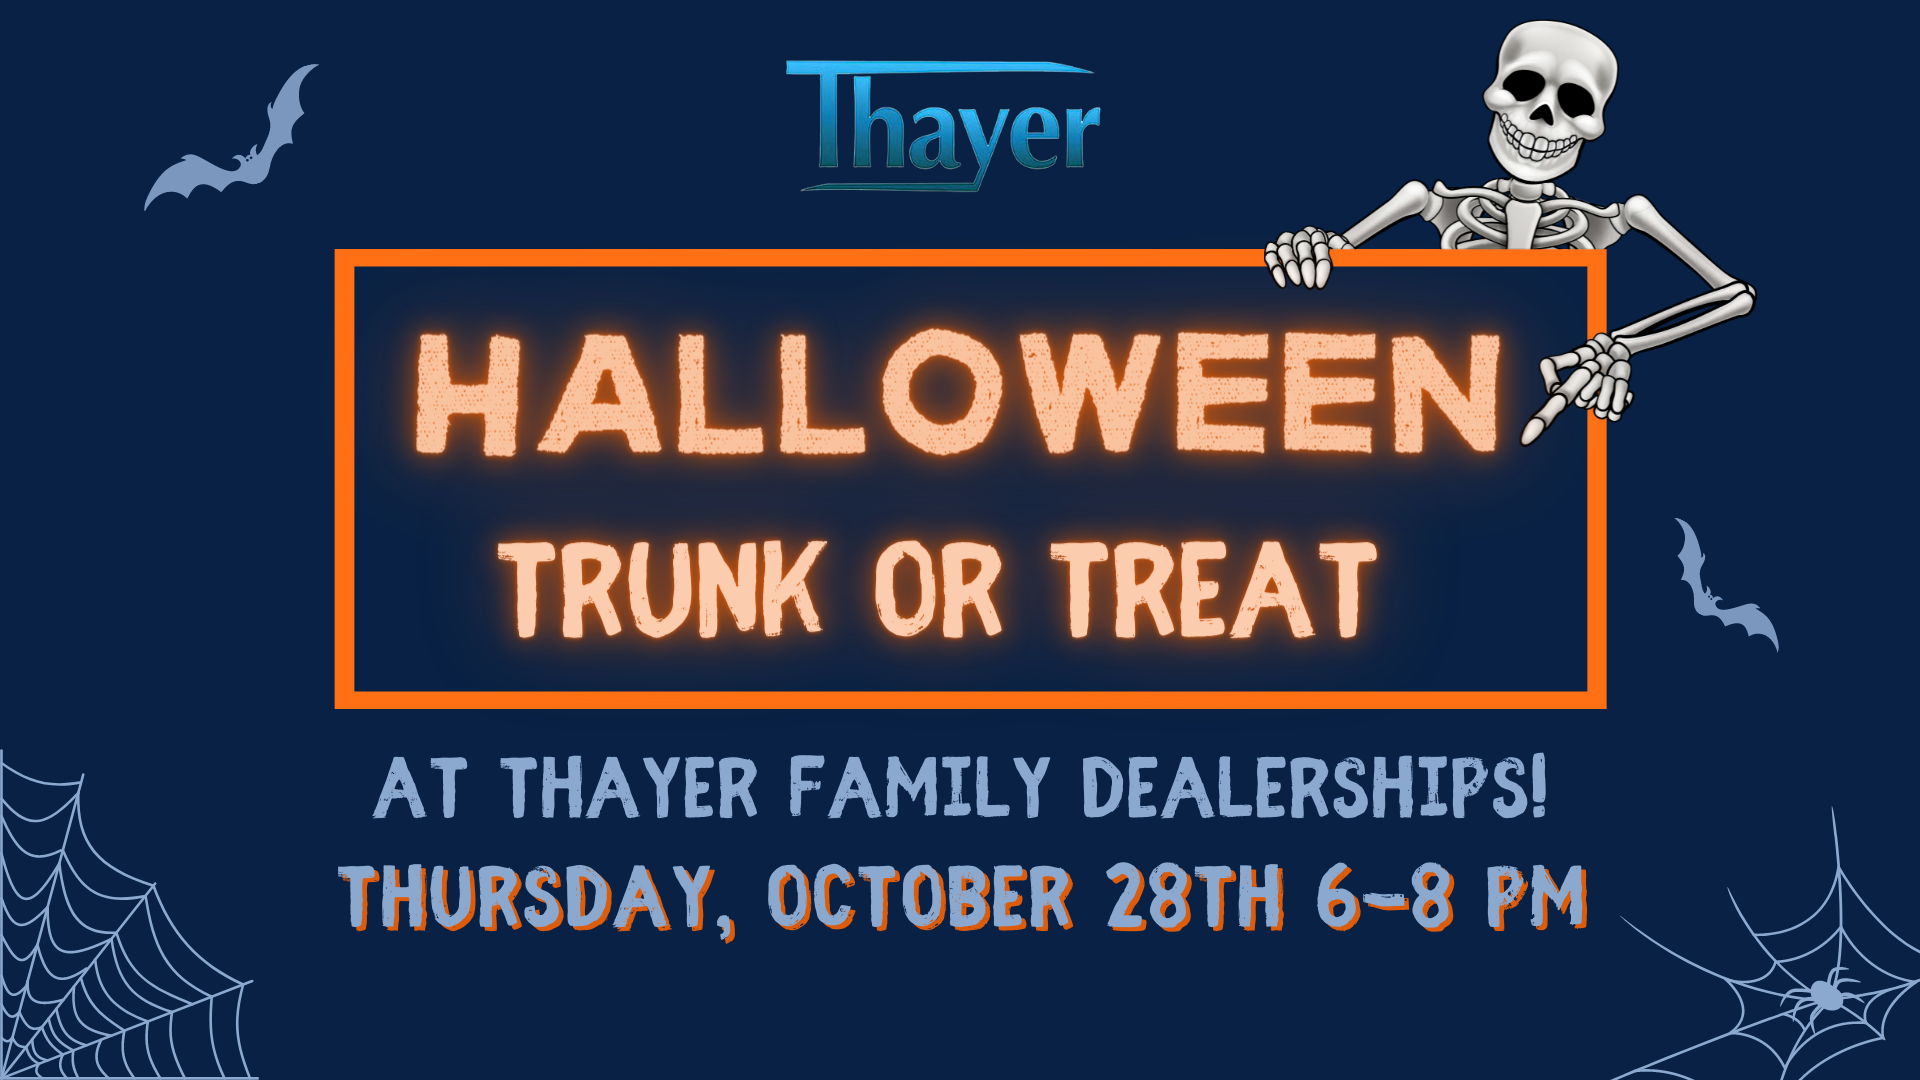 Halloween at Thayer Family Dealerships